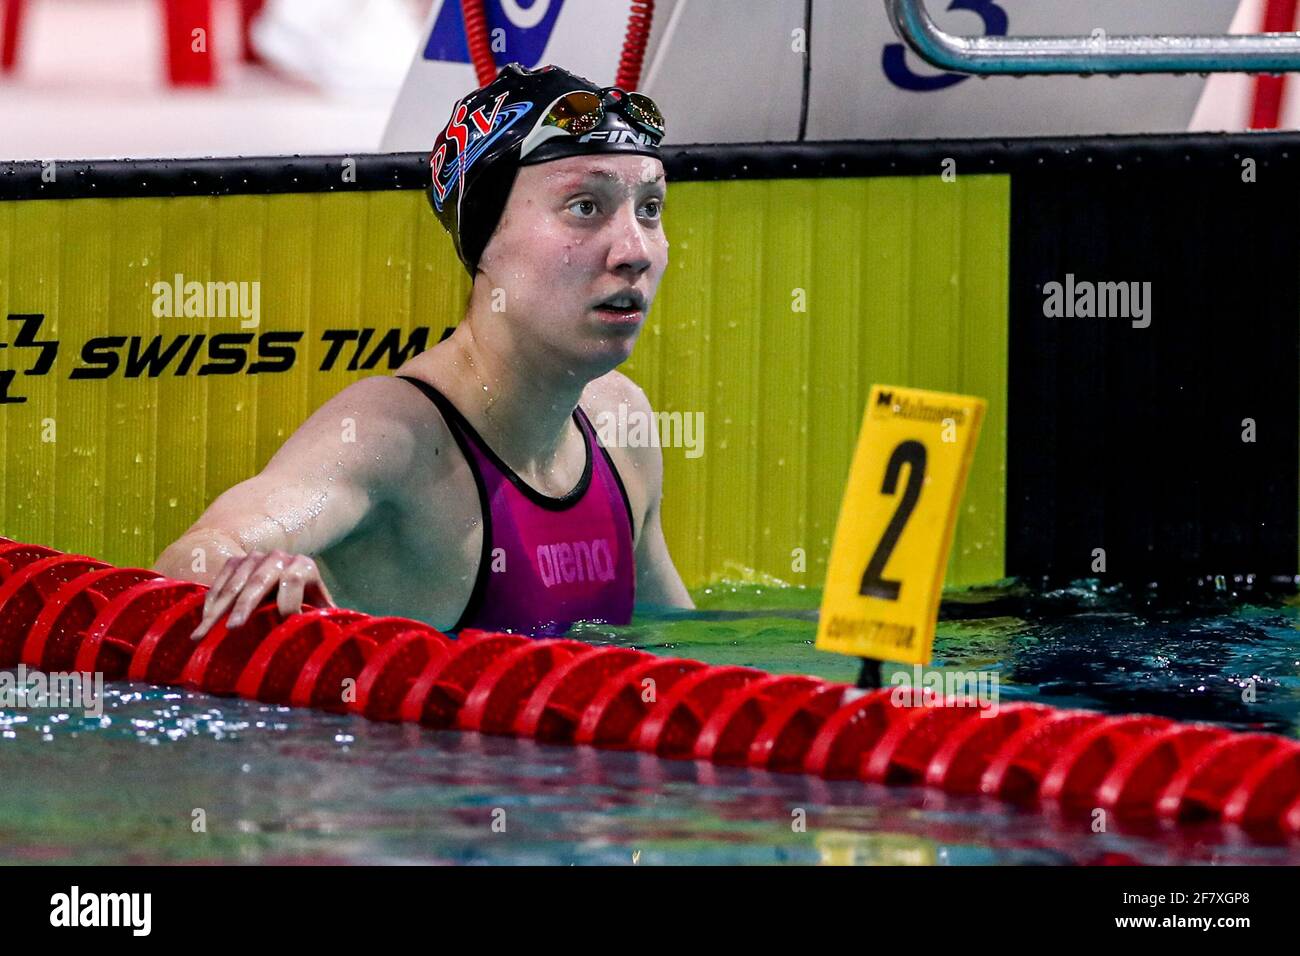 EINDHOVEN, NETHERLANDS - APRIL 10: Kim Jansen van Galen of the Netherlands winner of the Women 400m Medley during the Eindhoven Qualification Meet at Stock Photo